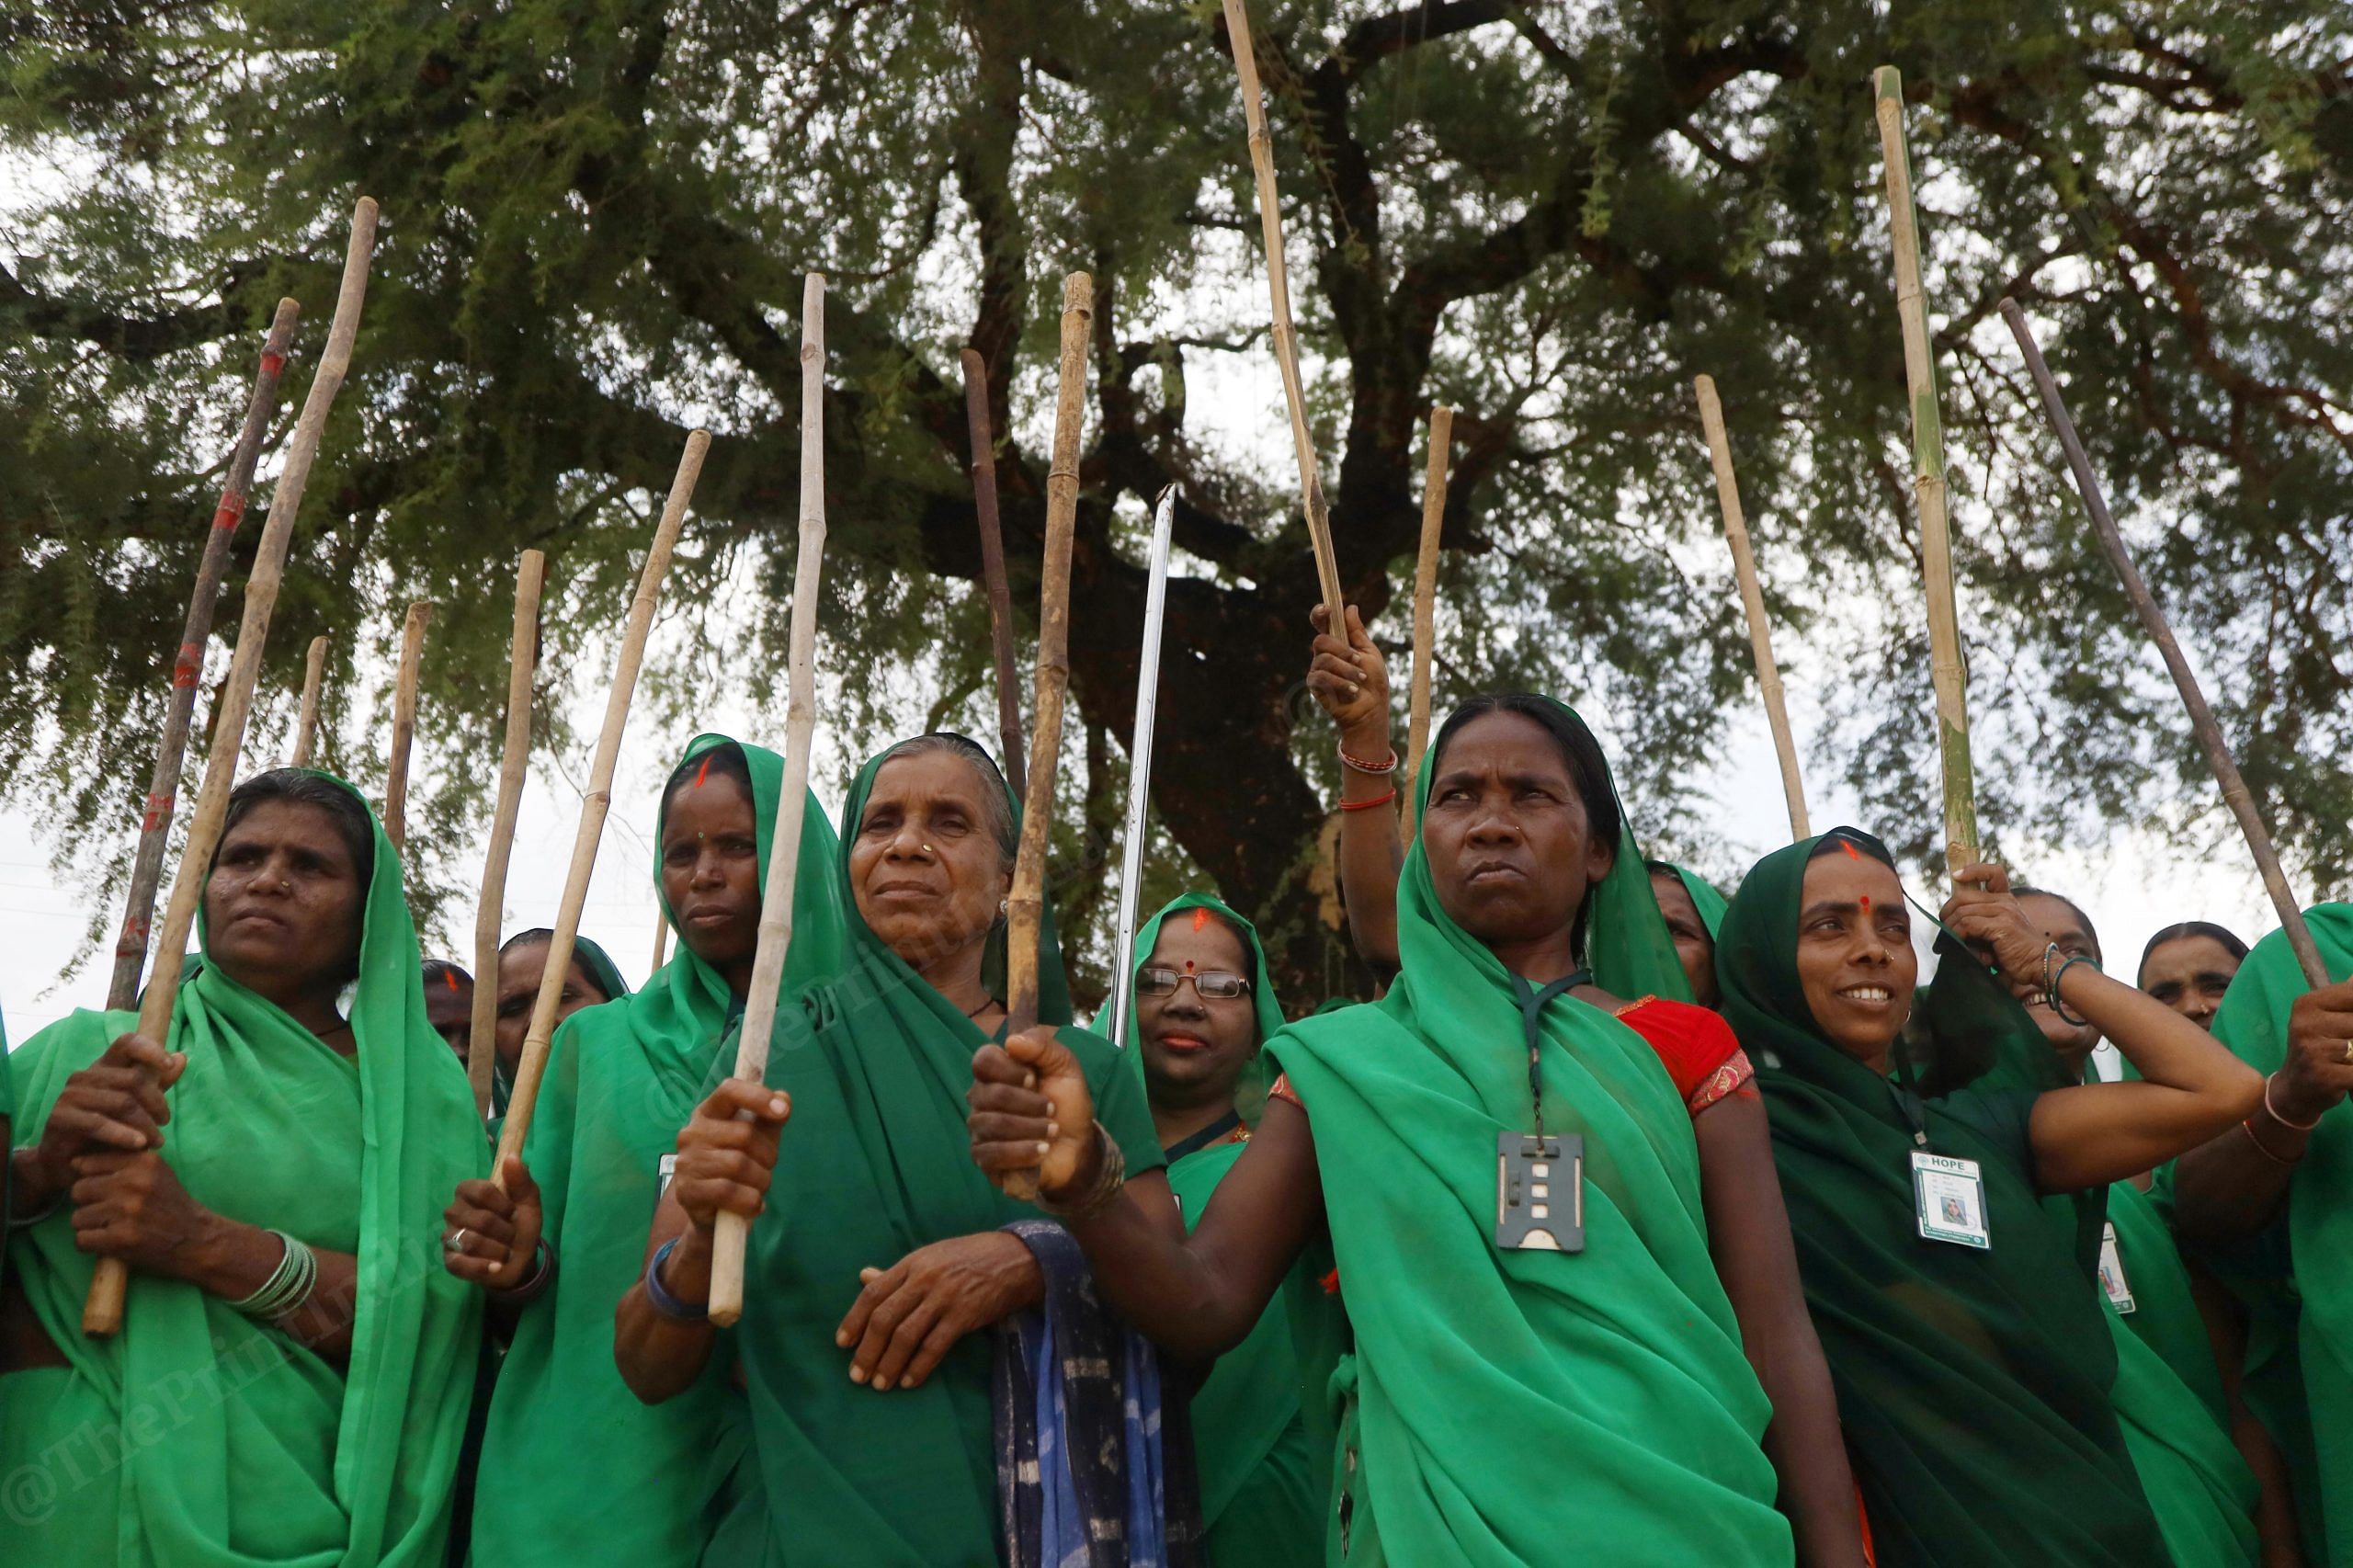 The Green Army in Uttar Pradesh was formed for women to take a stand against oppression and violence. This image of a group of Green Army members, heads demurely covered, but armed with sticks for self-defence, is for me a strong message of women's empowerment penetrating some of the most backward sections of society | Photo: Manisha Mondal | ThePrint